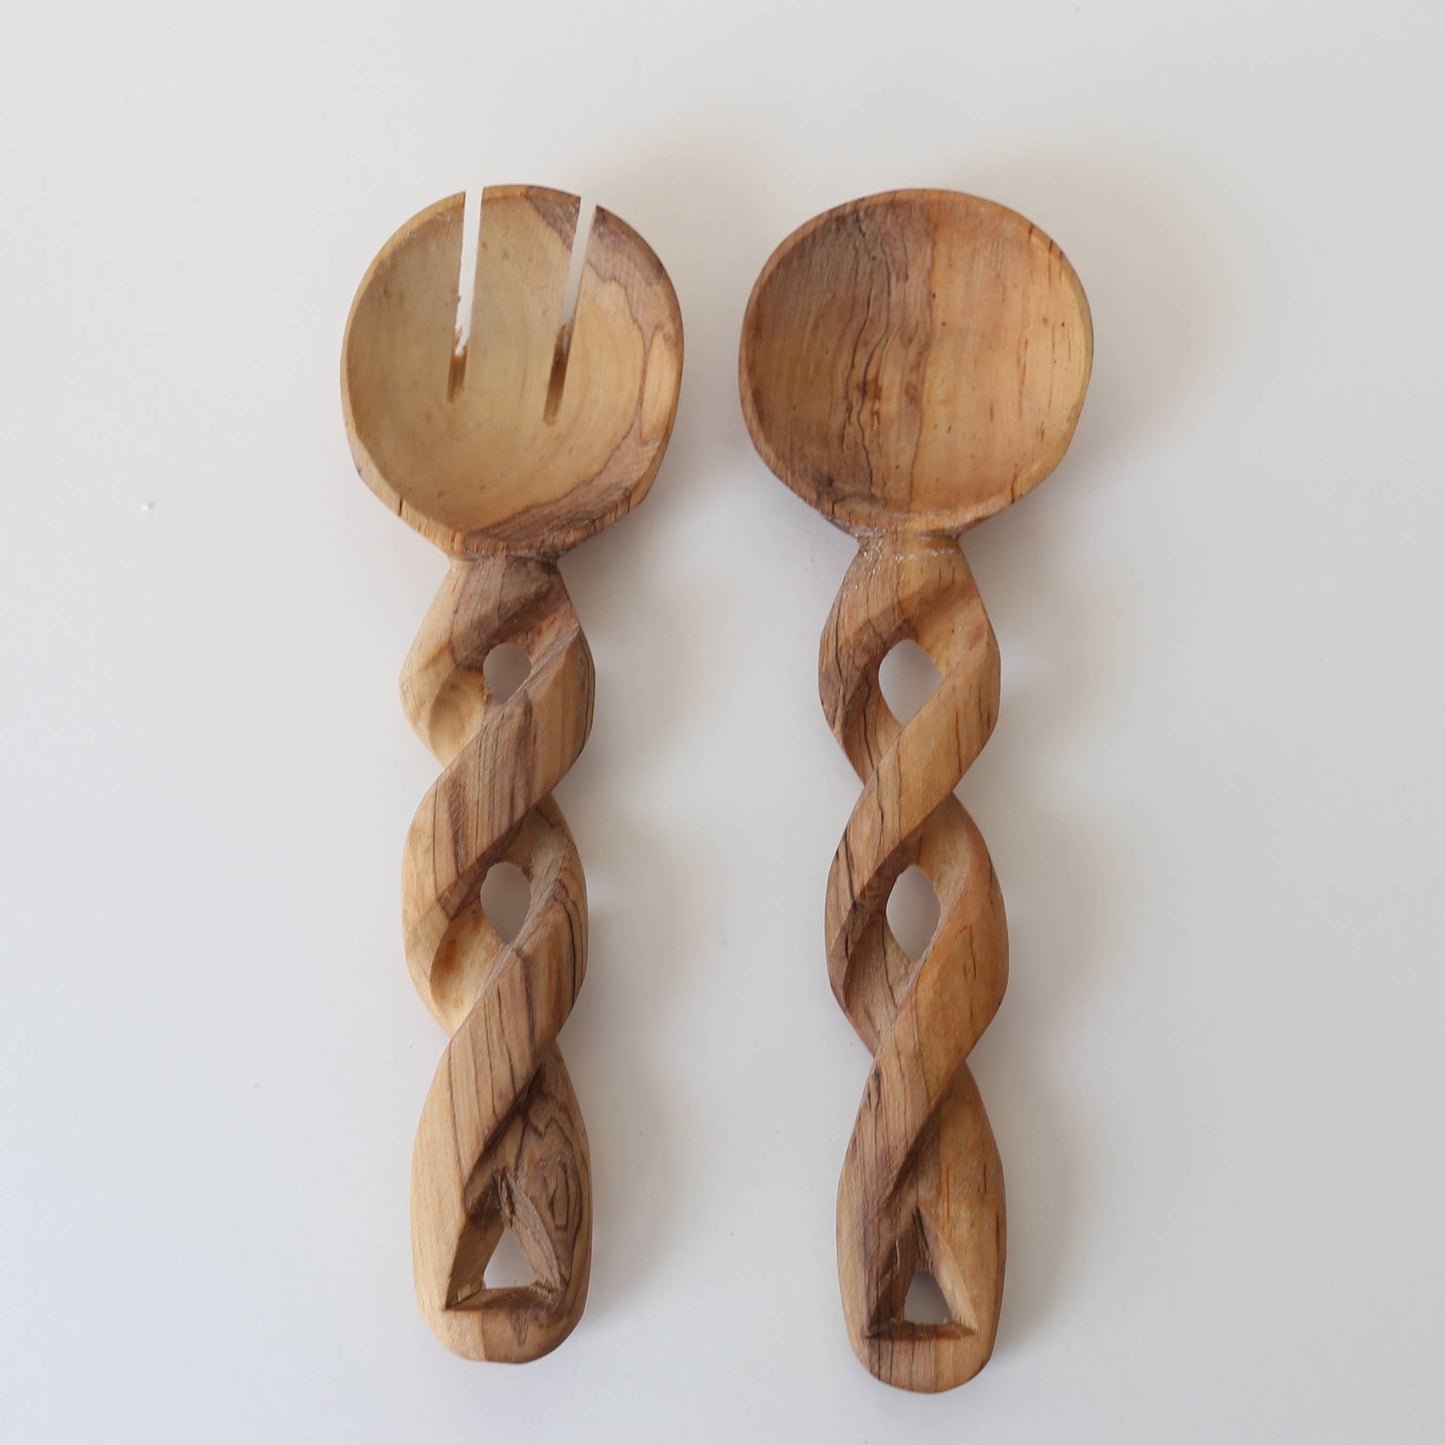 Twisted wood serving spoons.